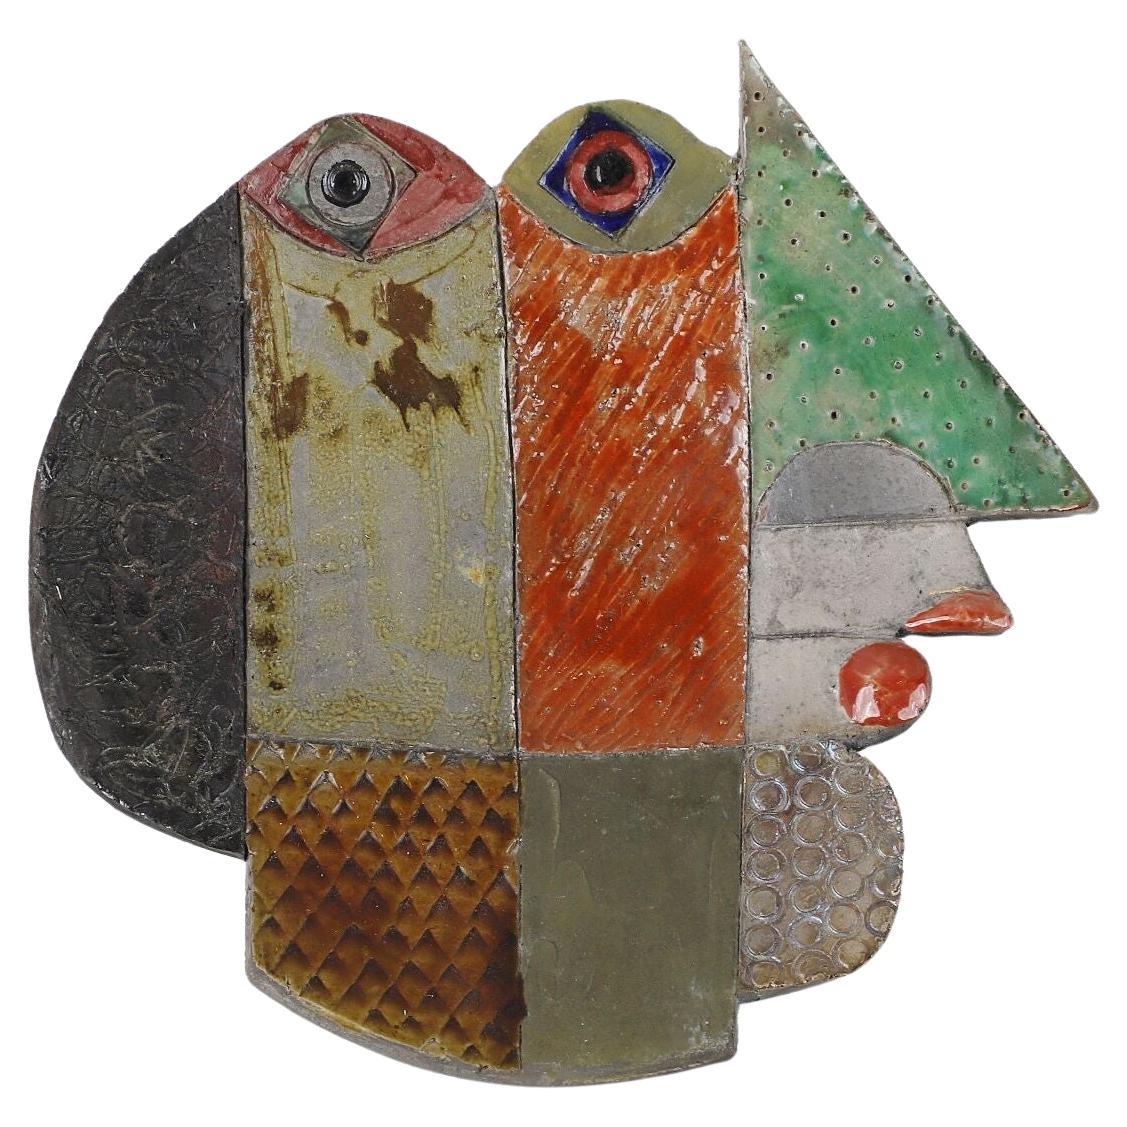 Roger Capron's Wall-mounted Sculpture Depicts a Face Inspired of Picasso For Sale